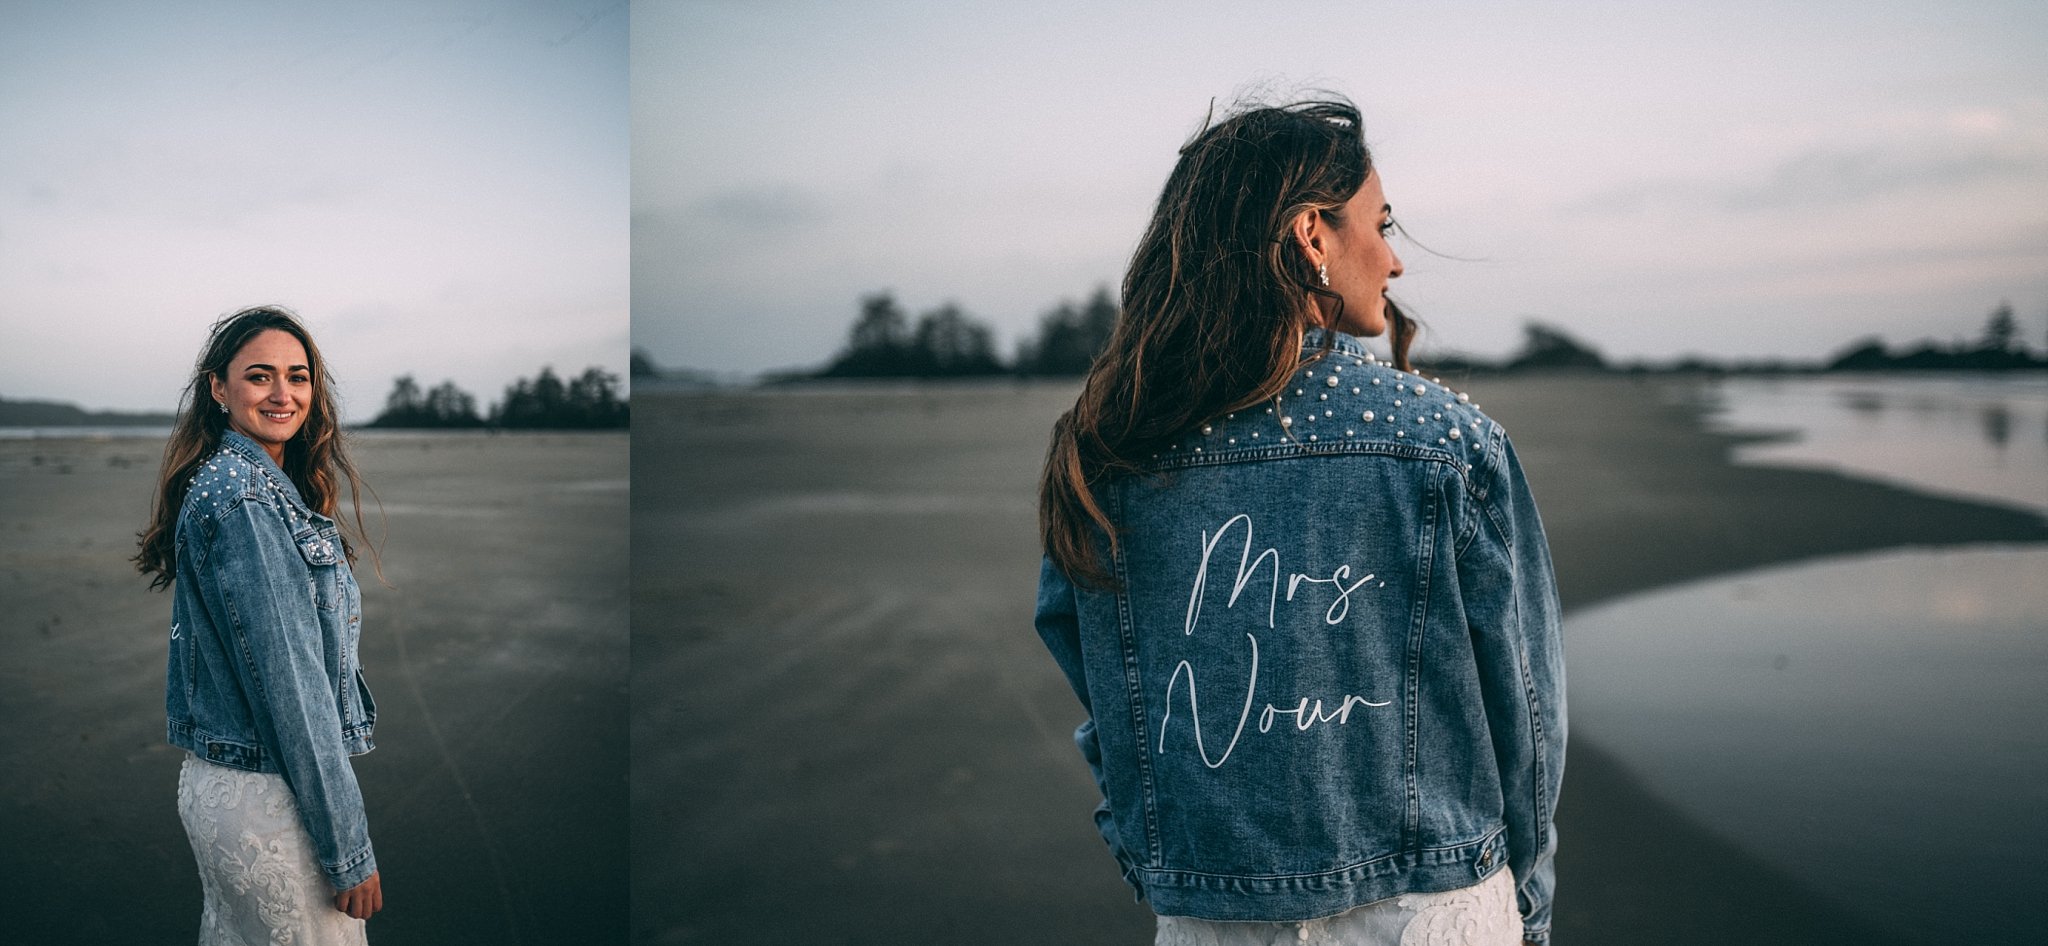 bride in customized jean jacket with new last name on back of jacket